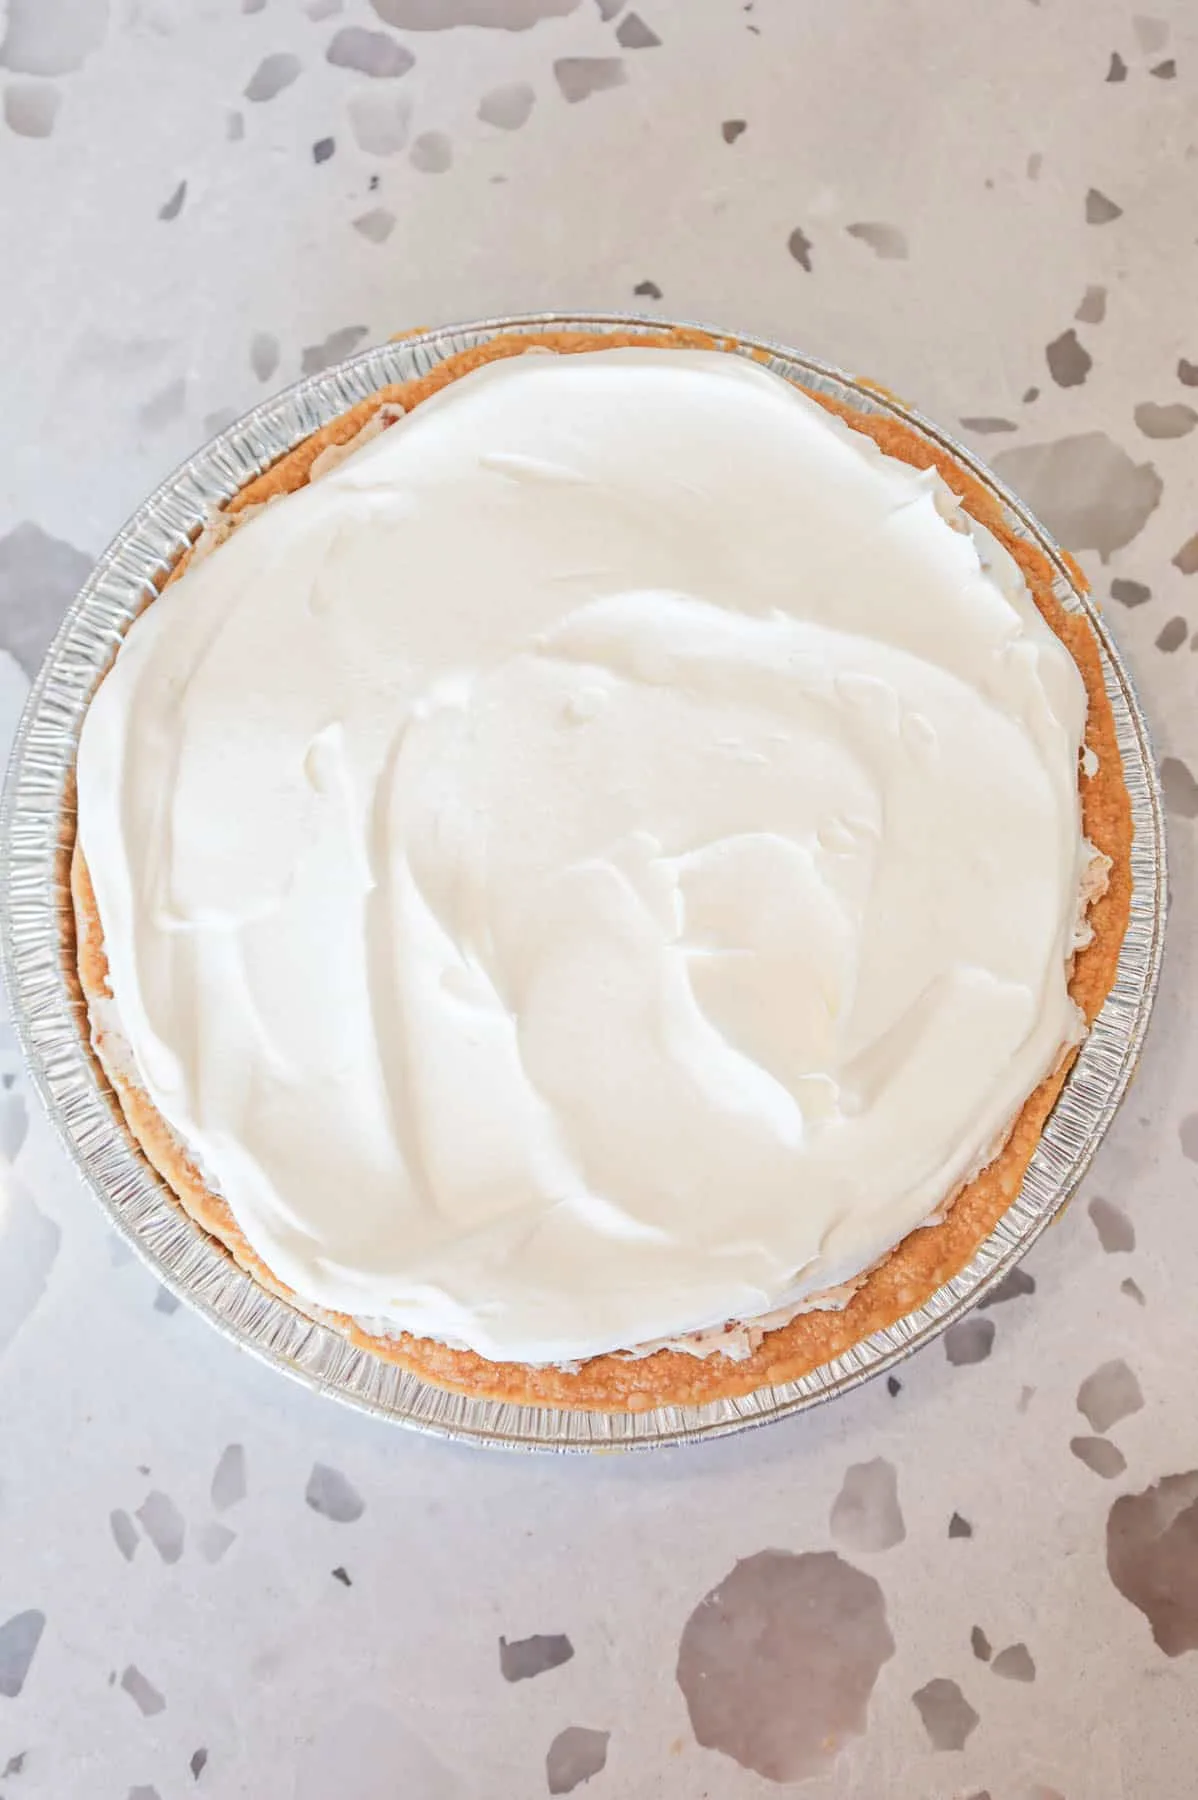 Cool Whip on top of pie